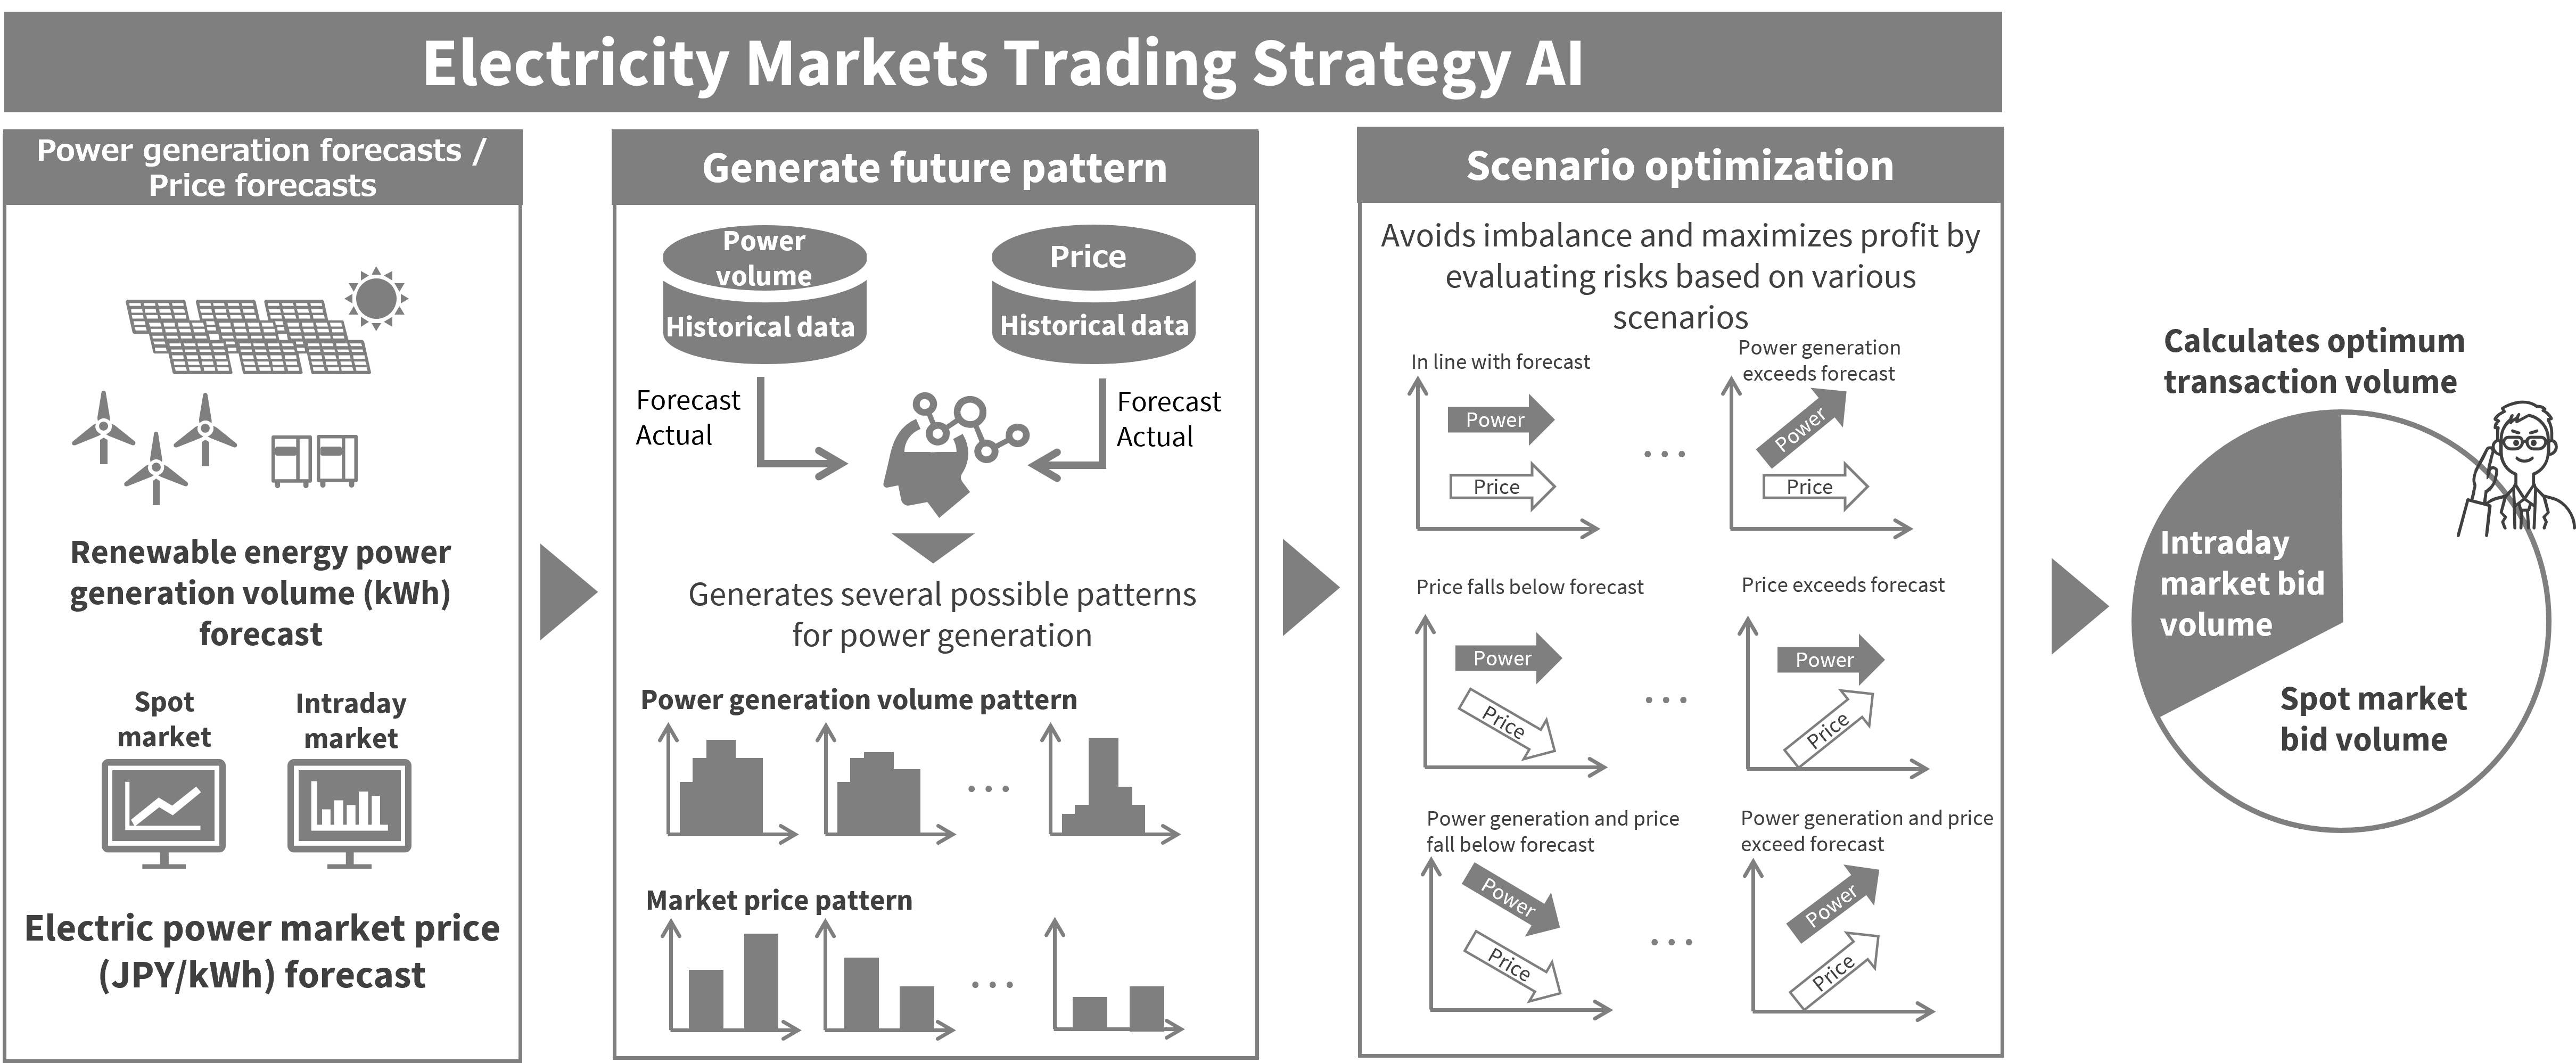 The Trading Strategy AI forecasts the amount of renewable energy power generated and market prices, creates scenarios based on historical data, and calculates the optimum transaction volume.